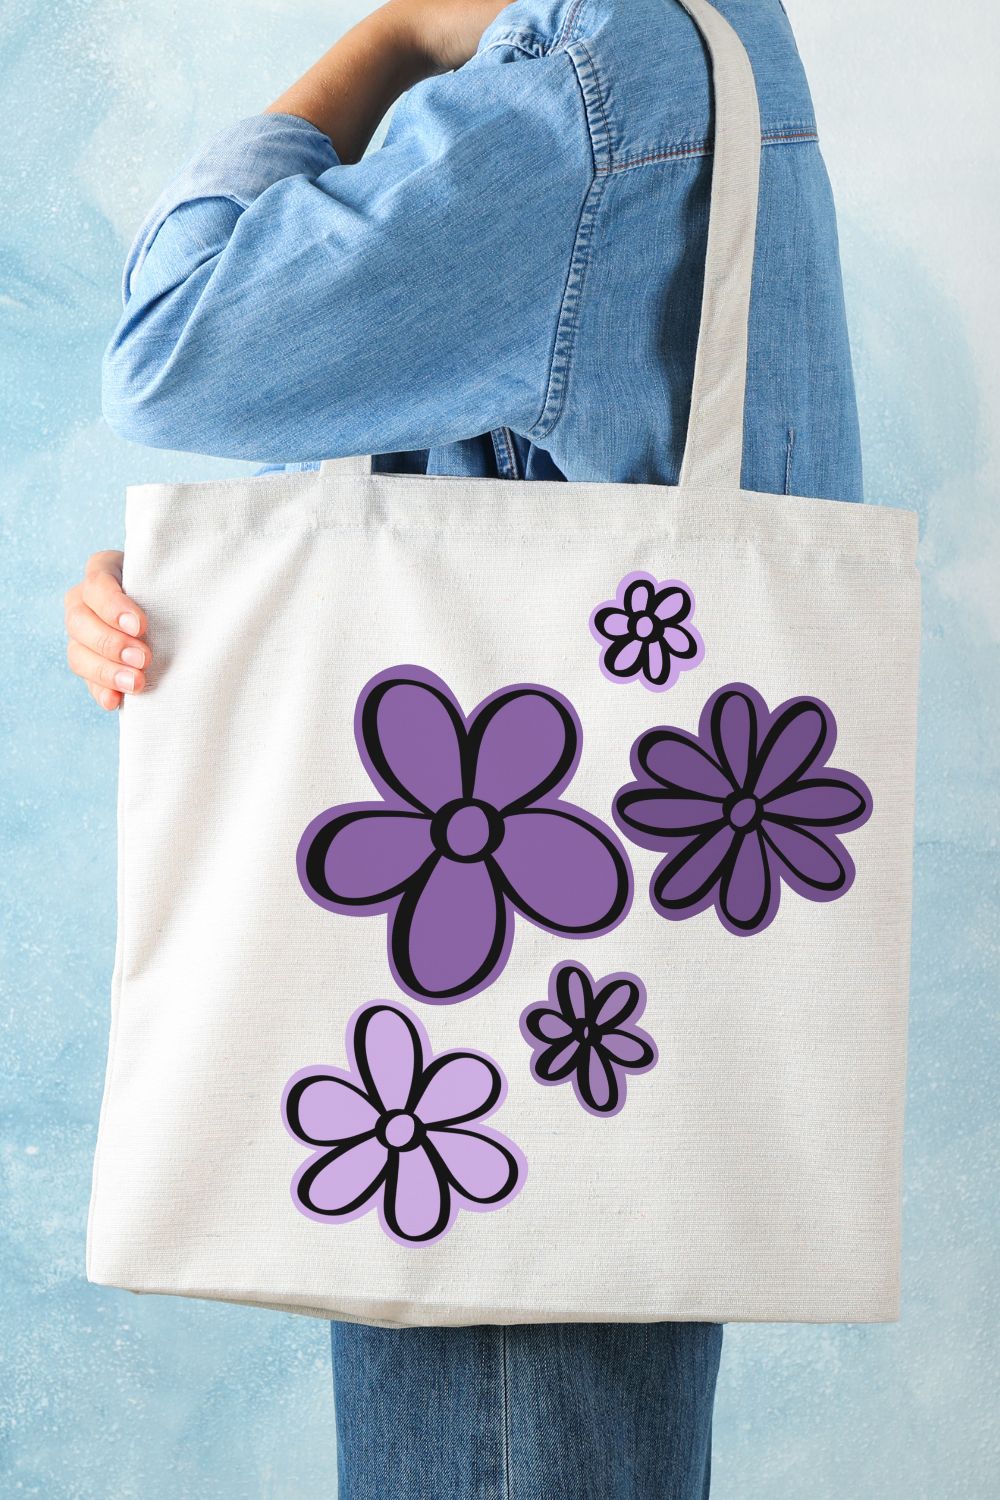 Free SVG- Hand Drawn flowers cut files shown cut with layers on a tote bag, the background layer is cut in a variety of purples and black outline